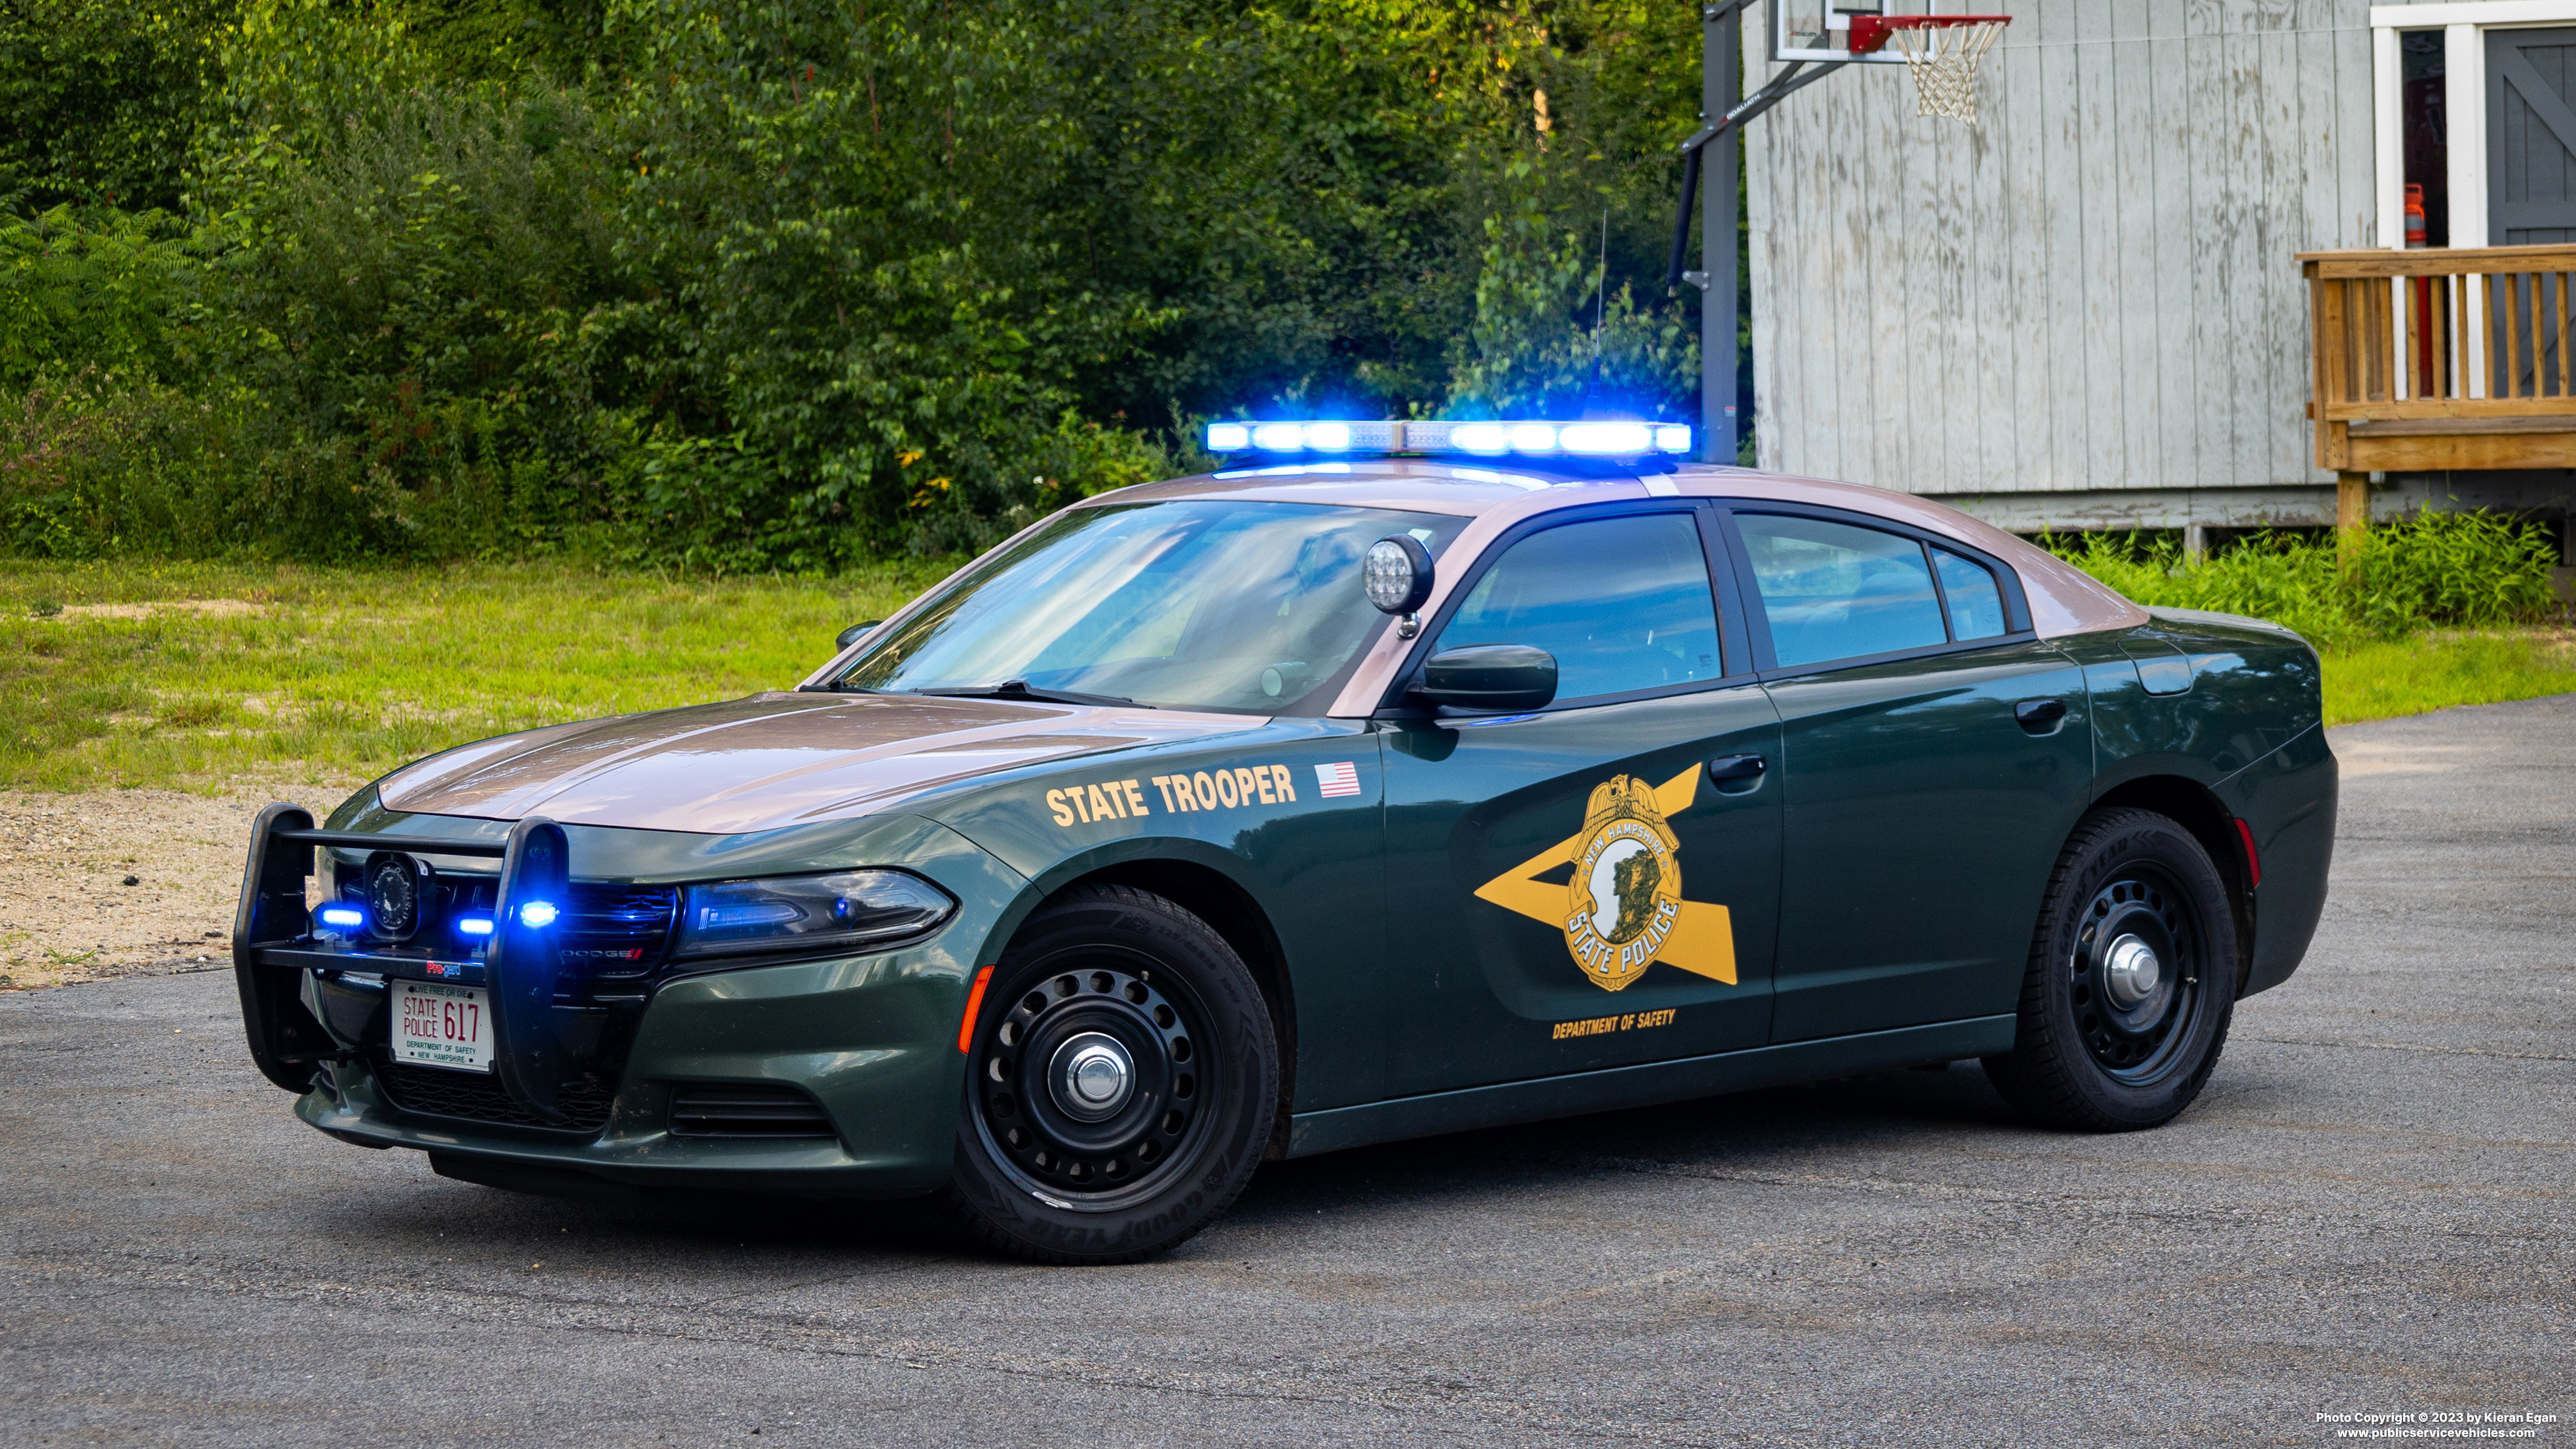 A photo  of New Hampshire State Police
            Cruiser 617, a 2017 Dodge Charger             taken by Kieran Egan